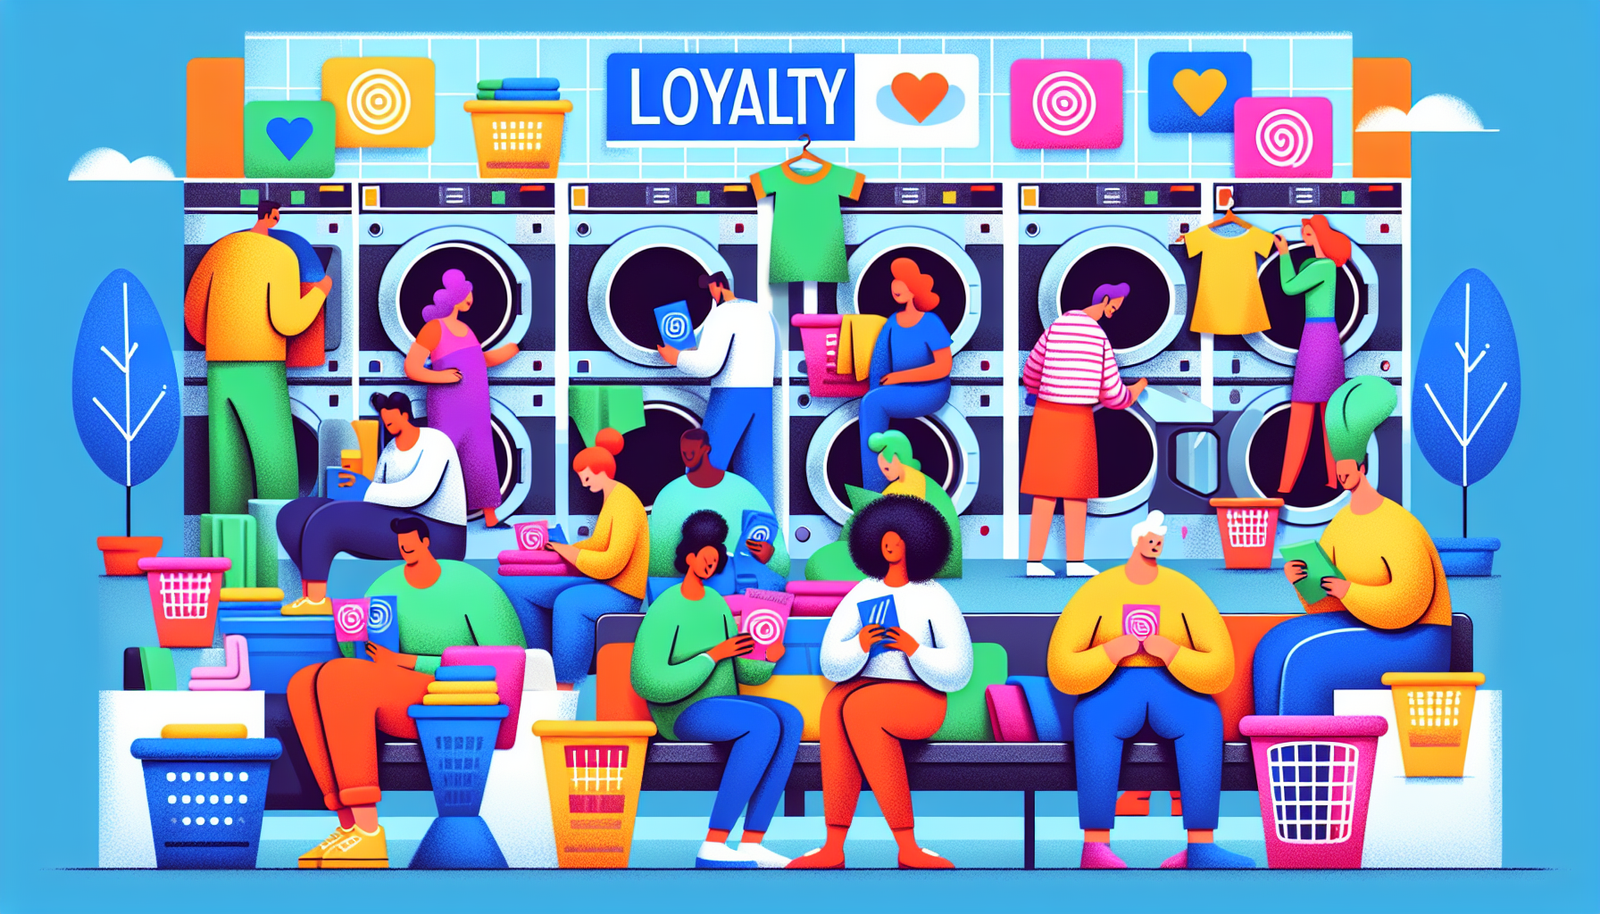 Illustration of satisfied customers using the laundromat with a loyalty card